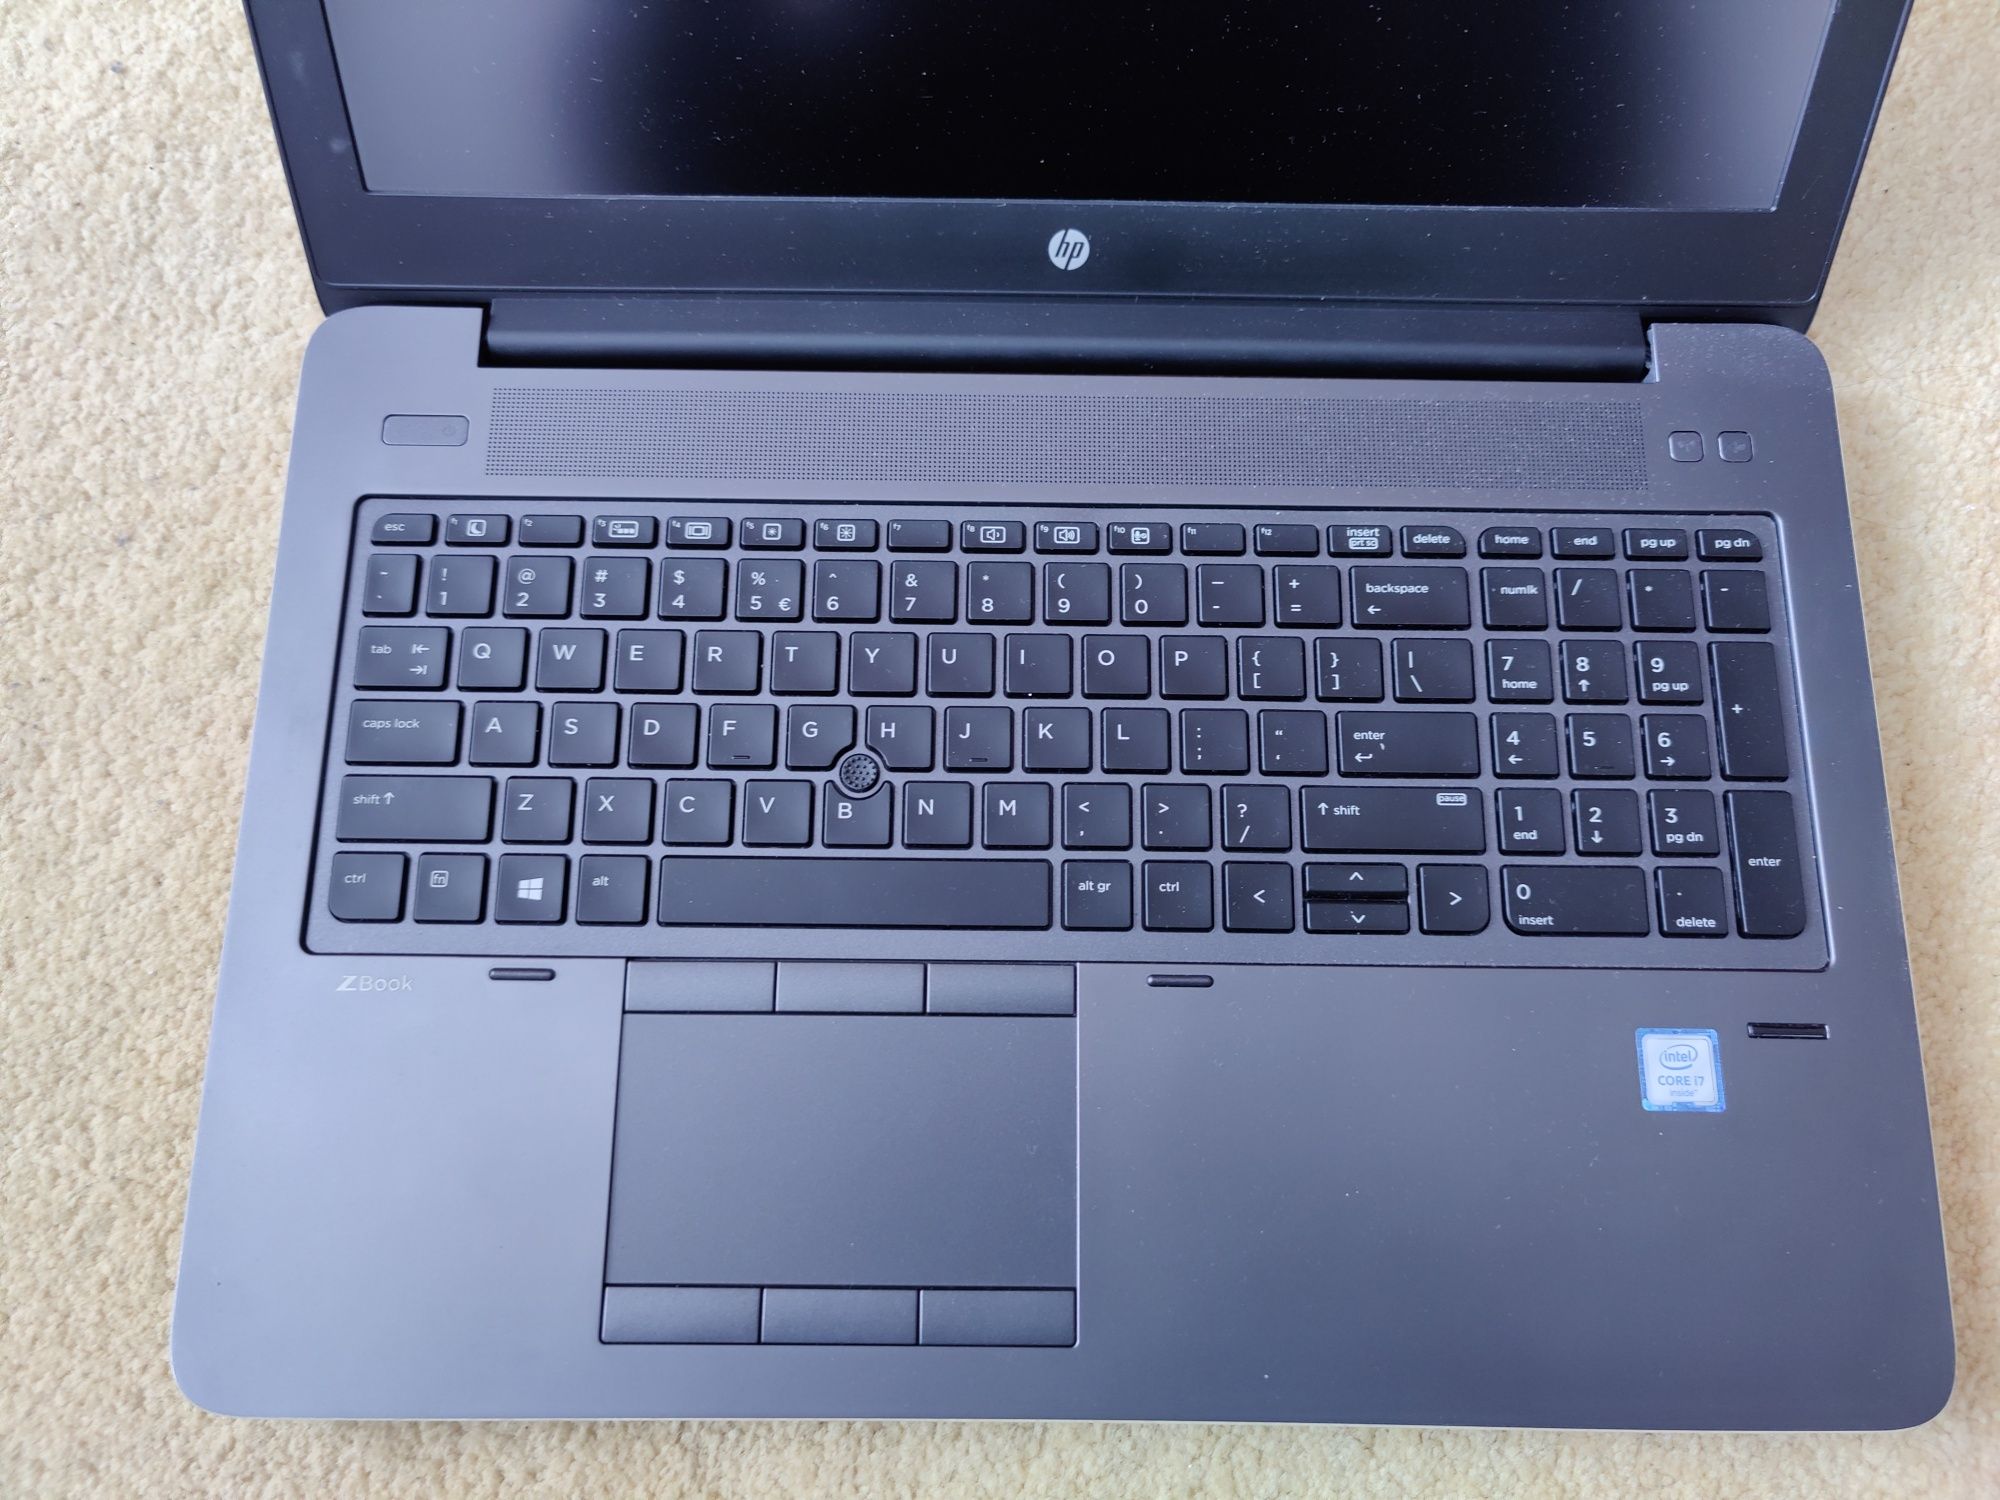 HP Zbook 15 G3 mobile Workstation i7-6820HQ / 16GB memory